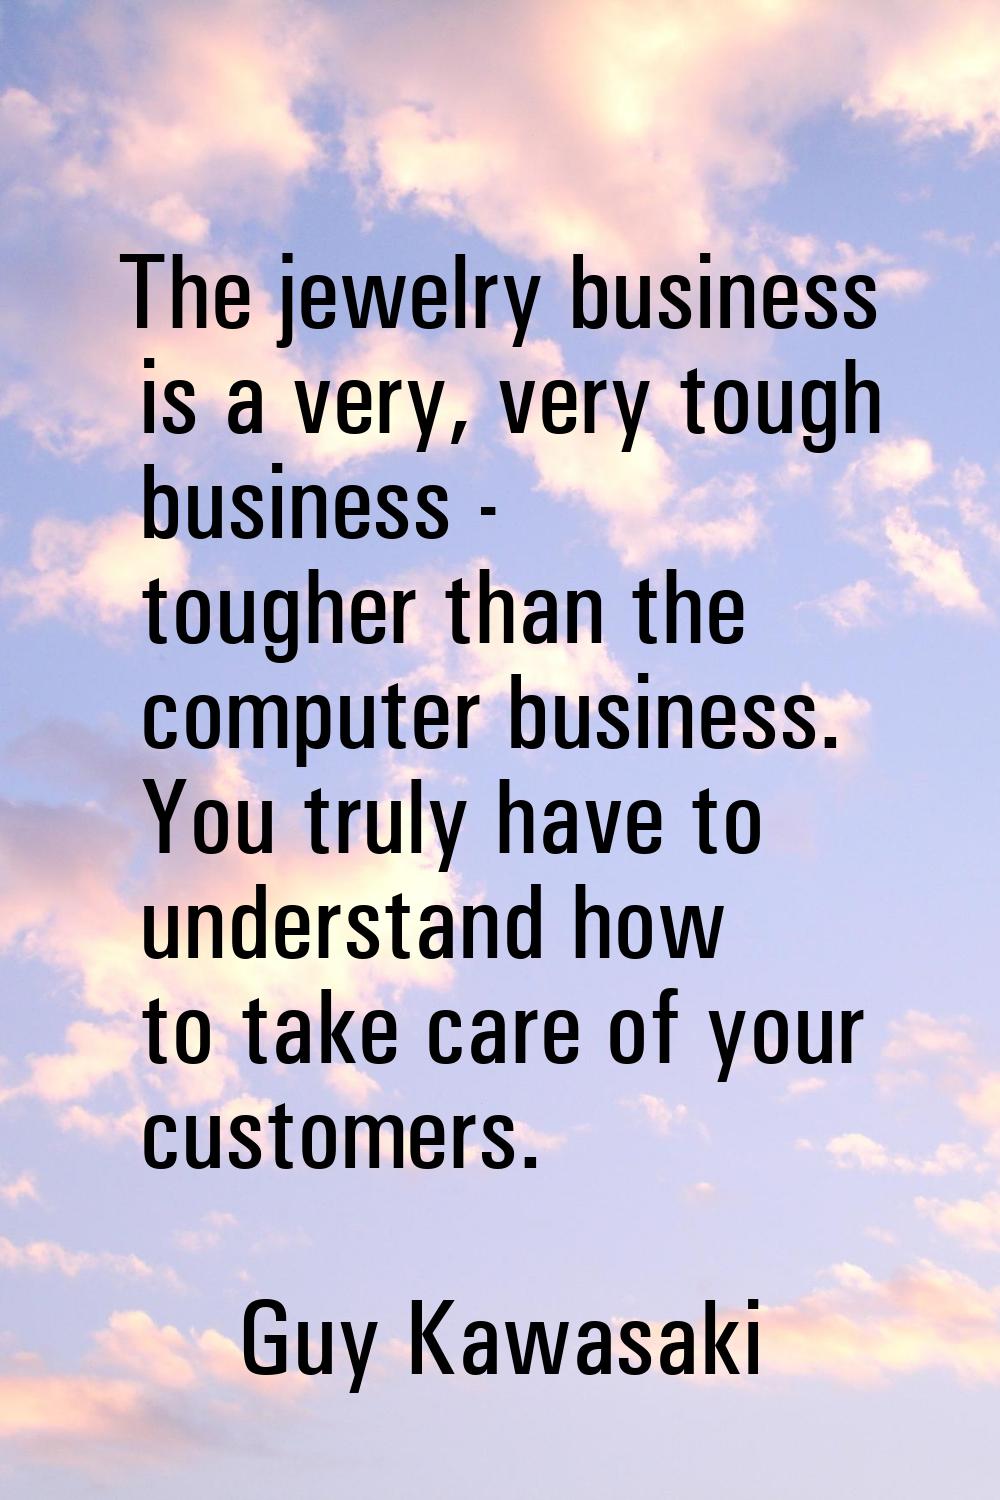 The jewelry business is a very, very tough business - tougher than the computer business. You truly